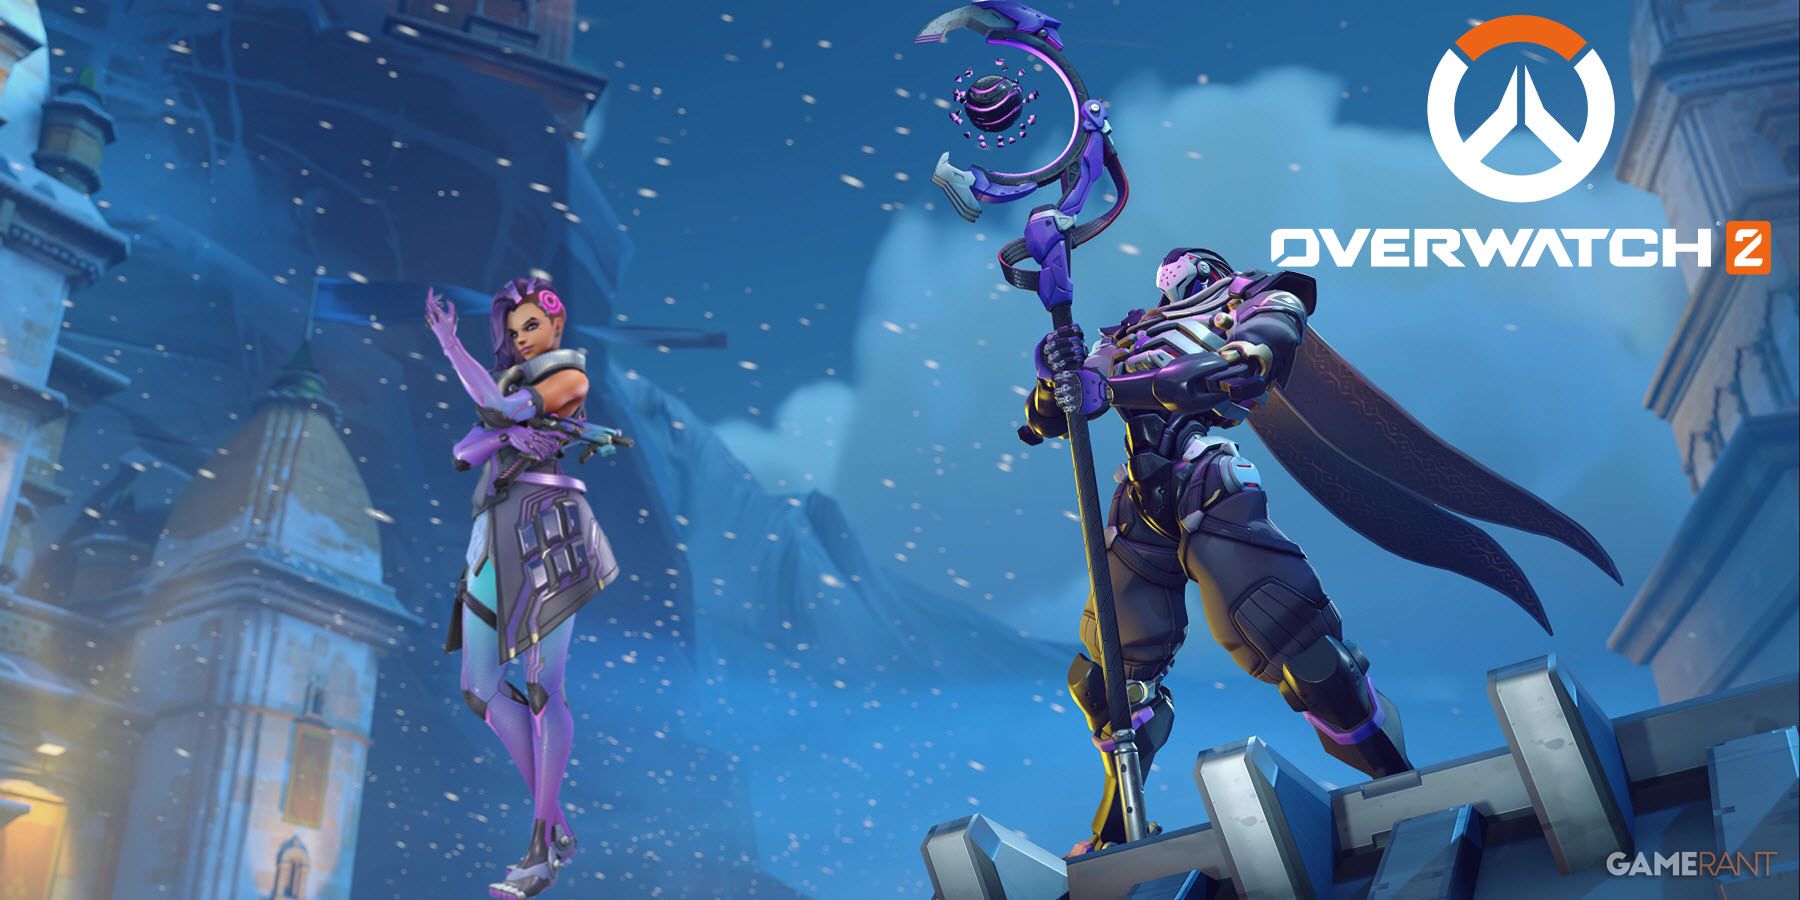 Overwatch 2 Player Shows Off Wild Sombra and Ramattra Rollout Trick